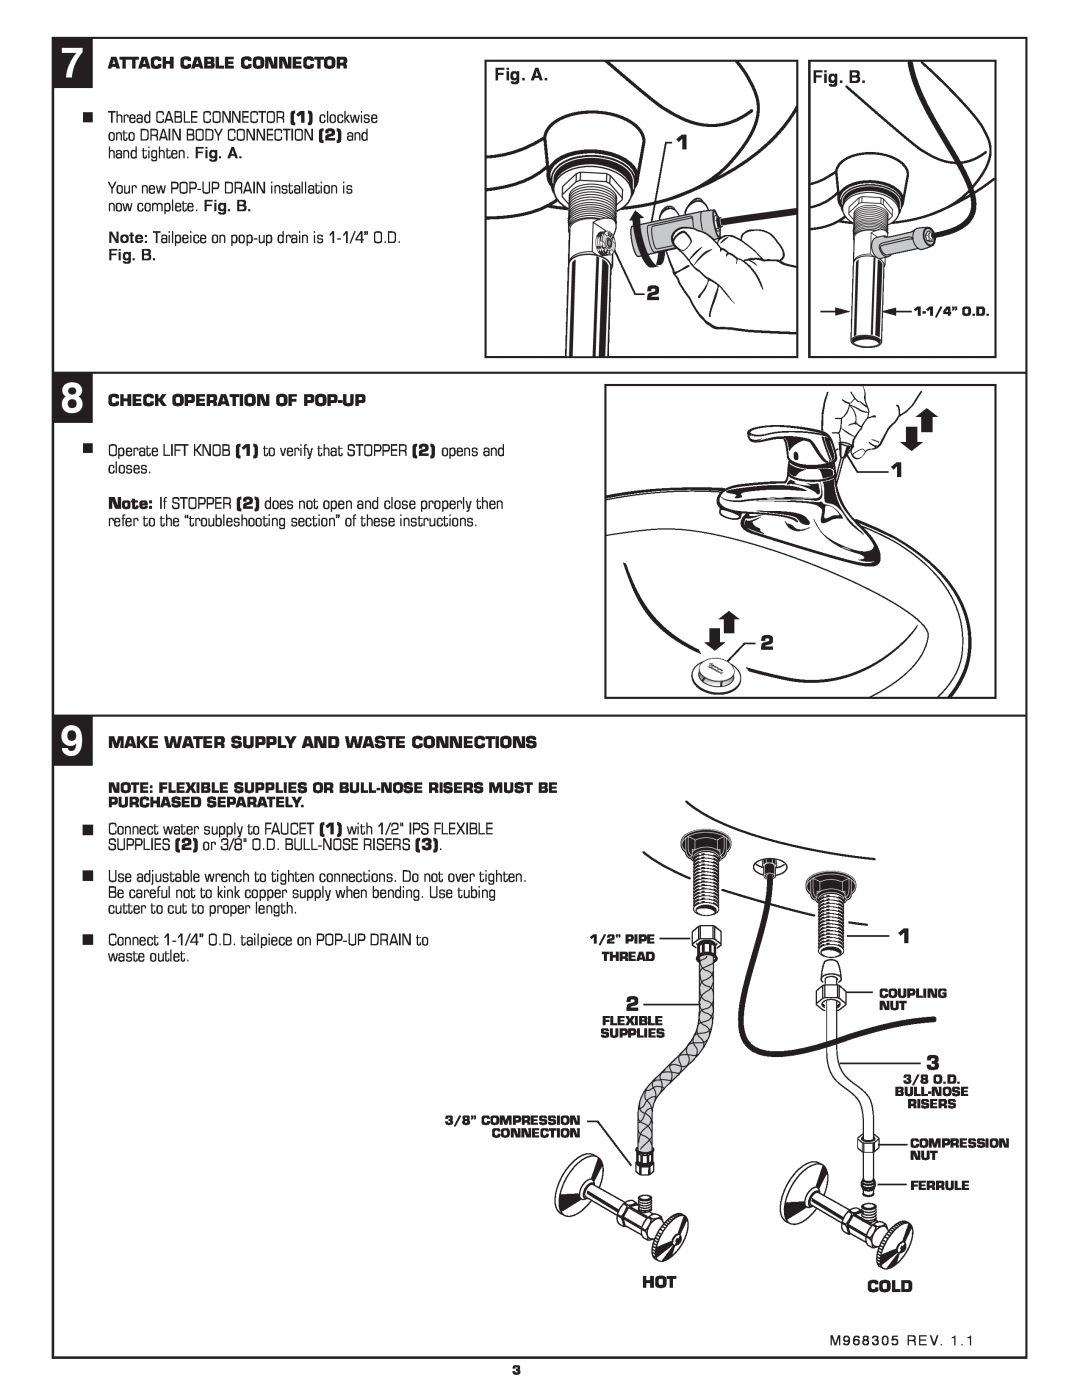 American Standard 1480.110 Attach Cable Connector, Check Operation Of Pop-Up, Make Water Supply And Waste Connections 